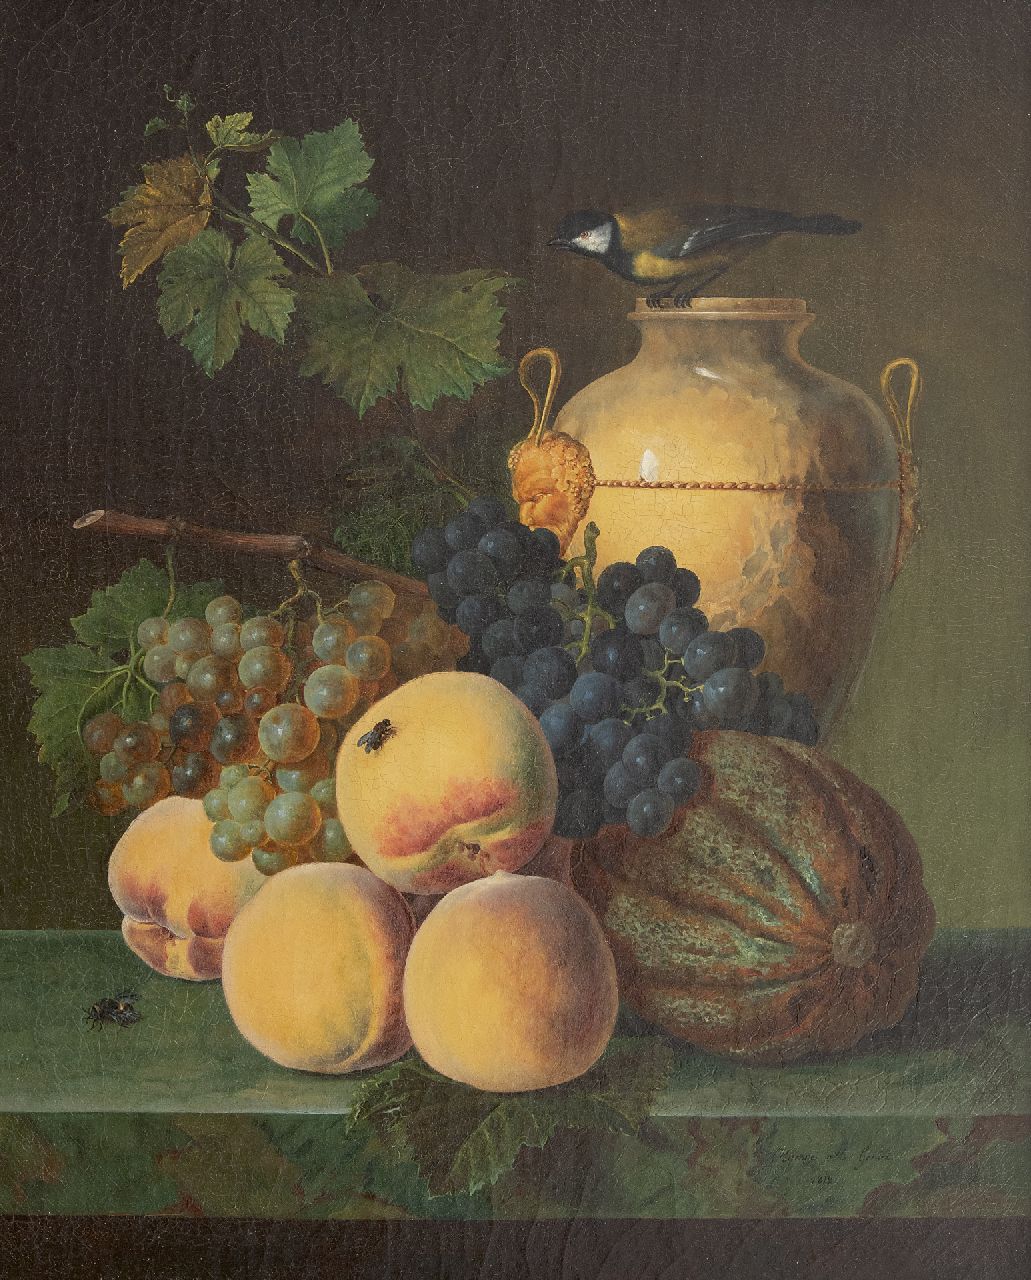 Olympe Mouette Génin | A still life with peaches, an amphora and a bird, oil on canvas, 49.0 x 39.9 cm, signed l.r. and dated 1818